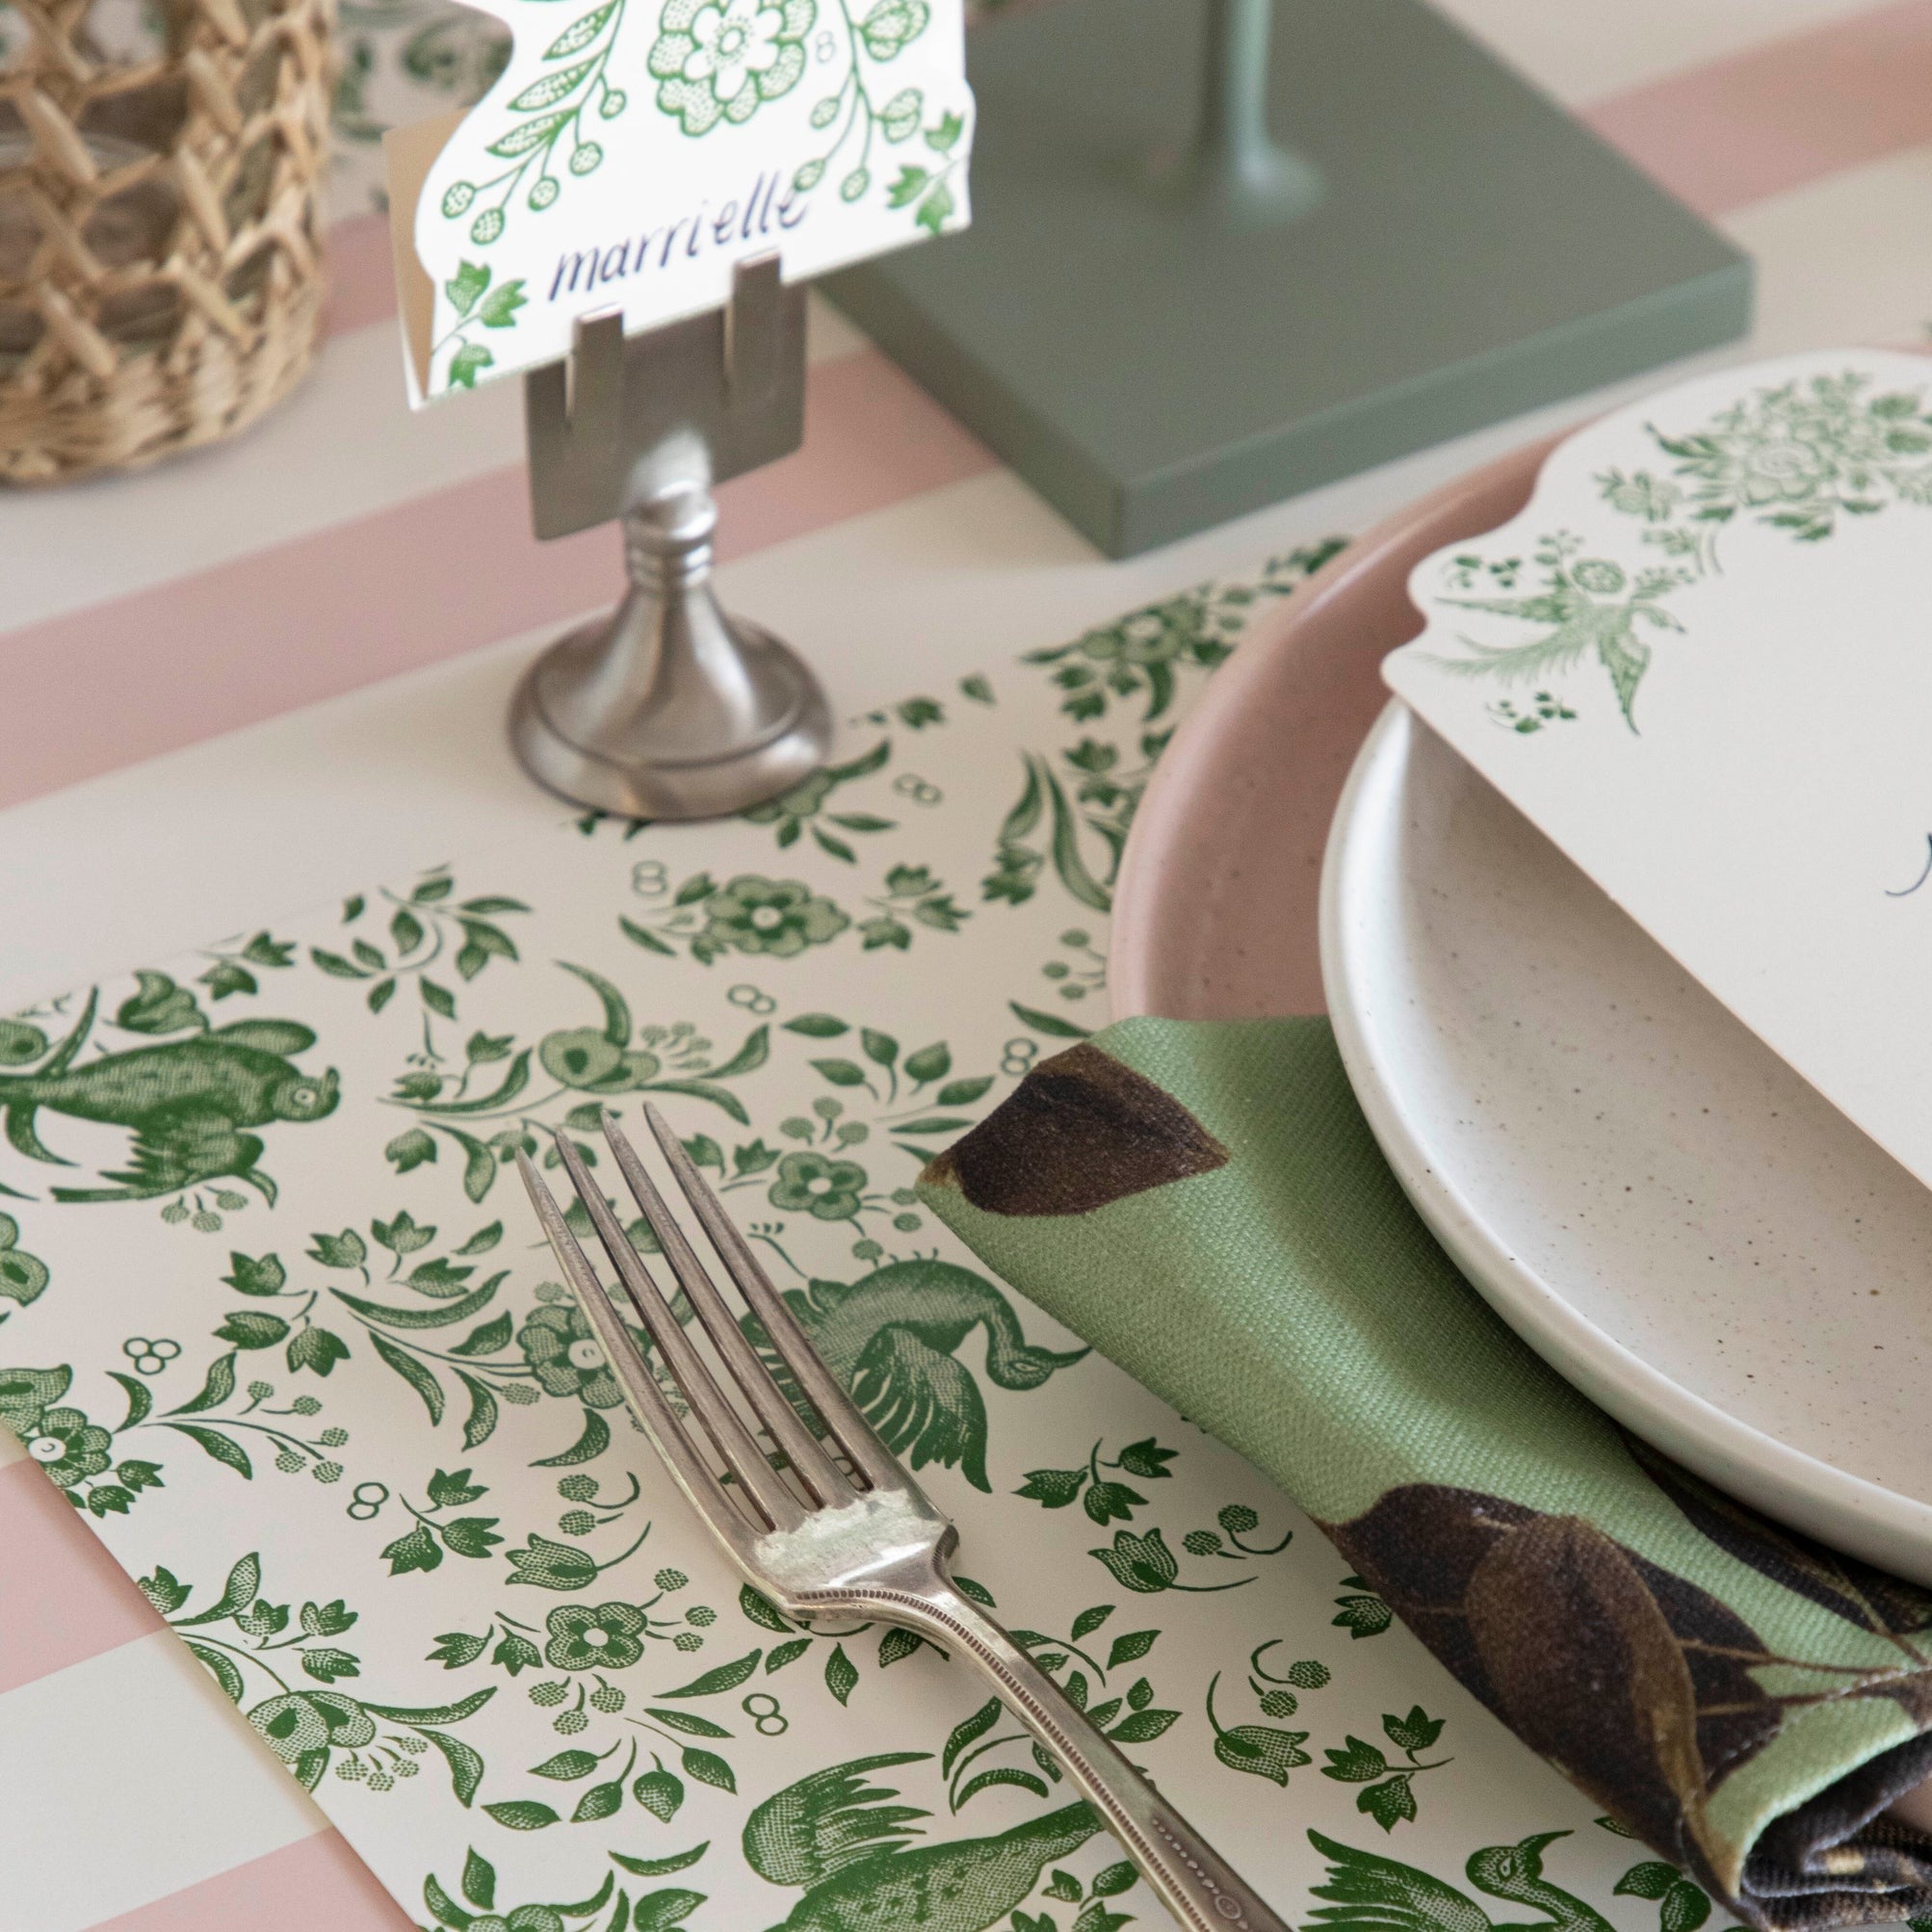 Close-up of the Green Regal Peacock Placemat under an elegant table setting, showing bird and flower details.